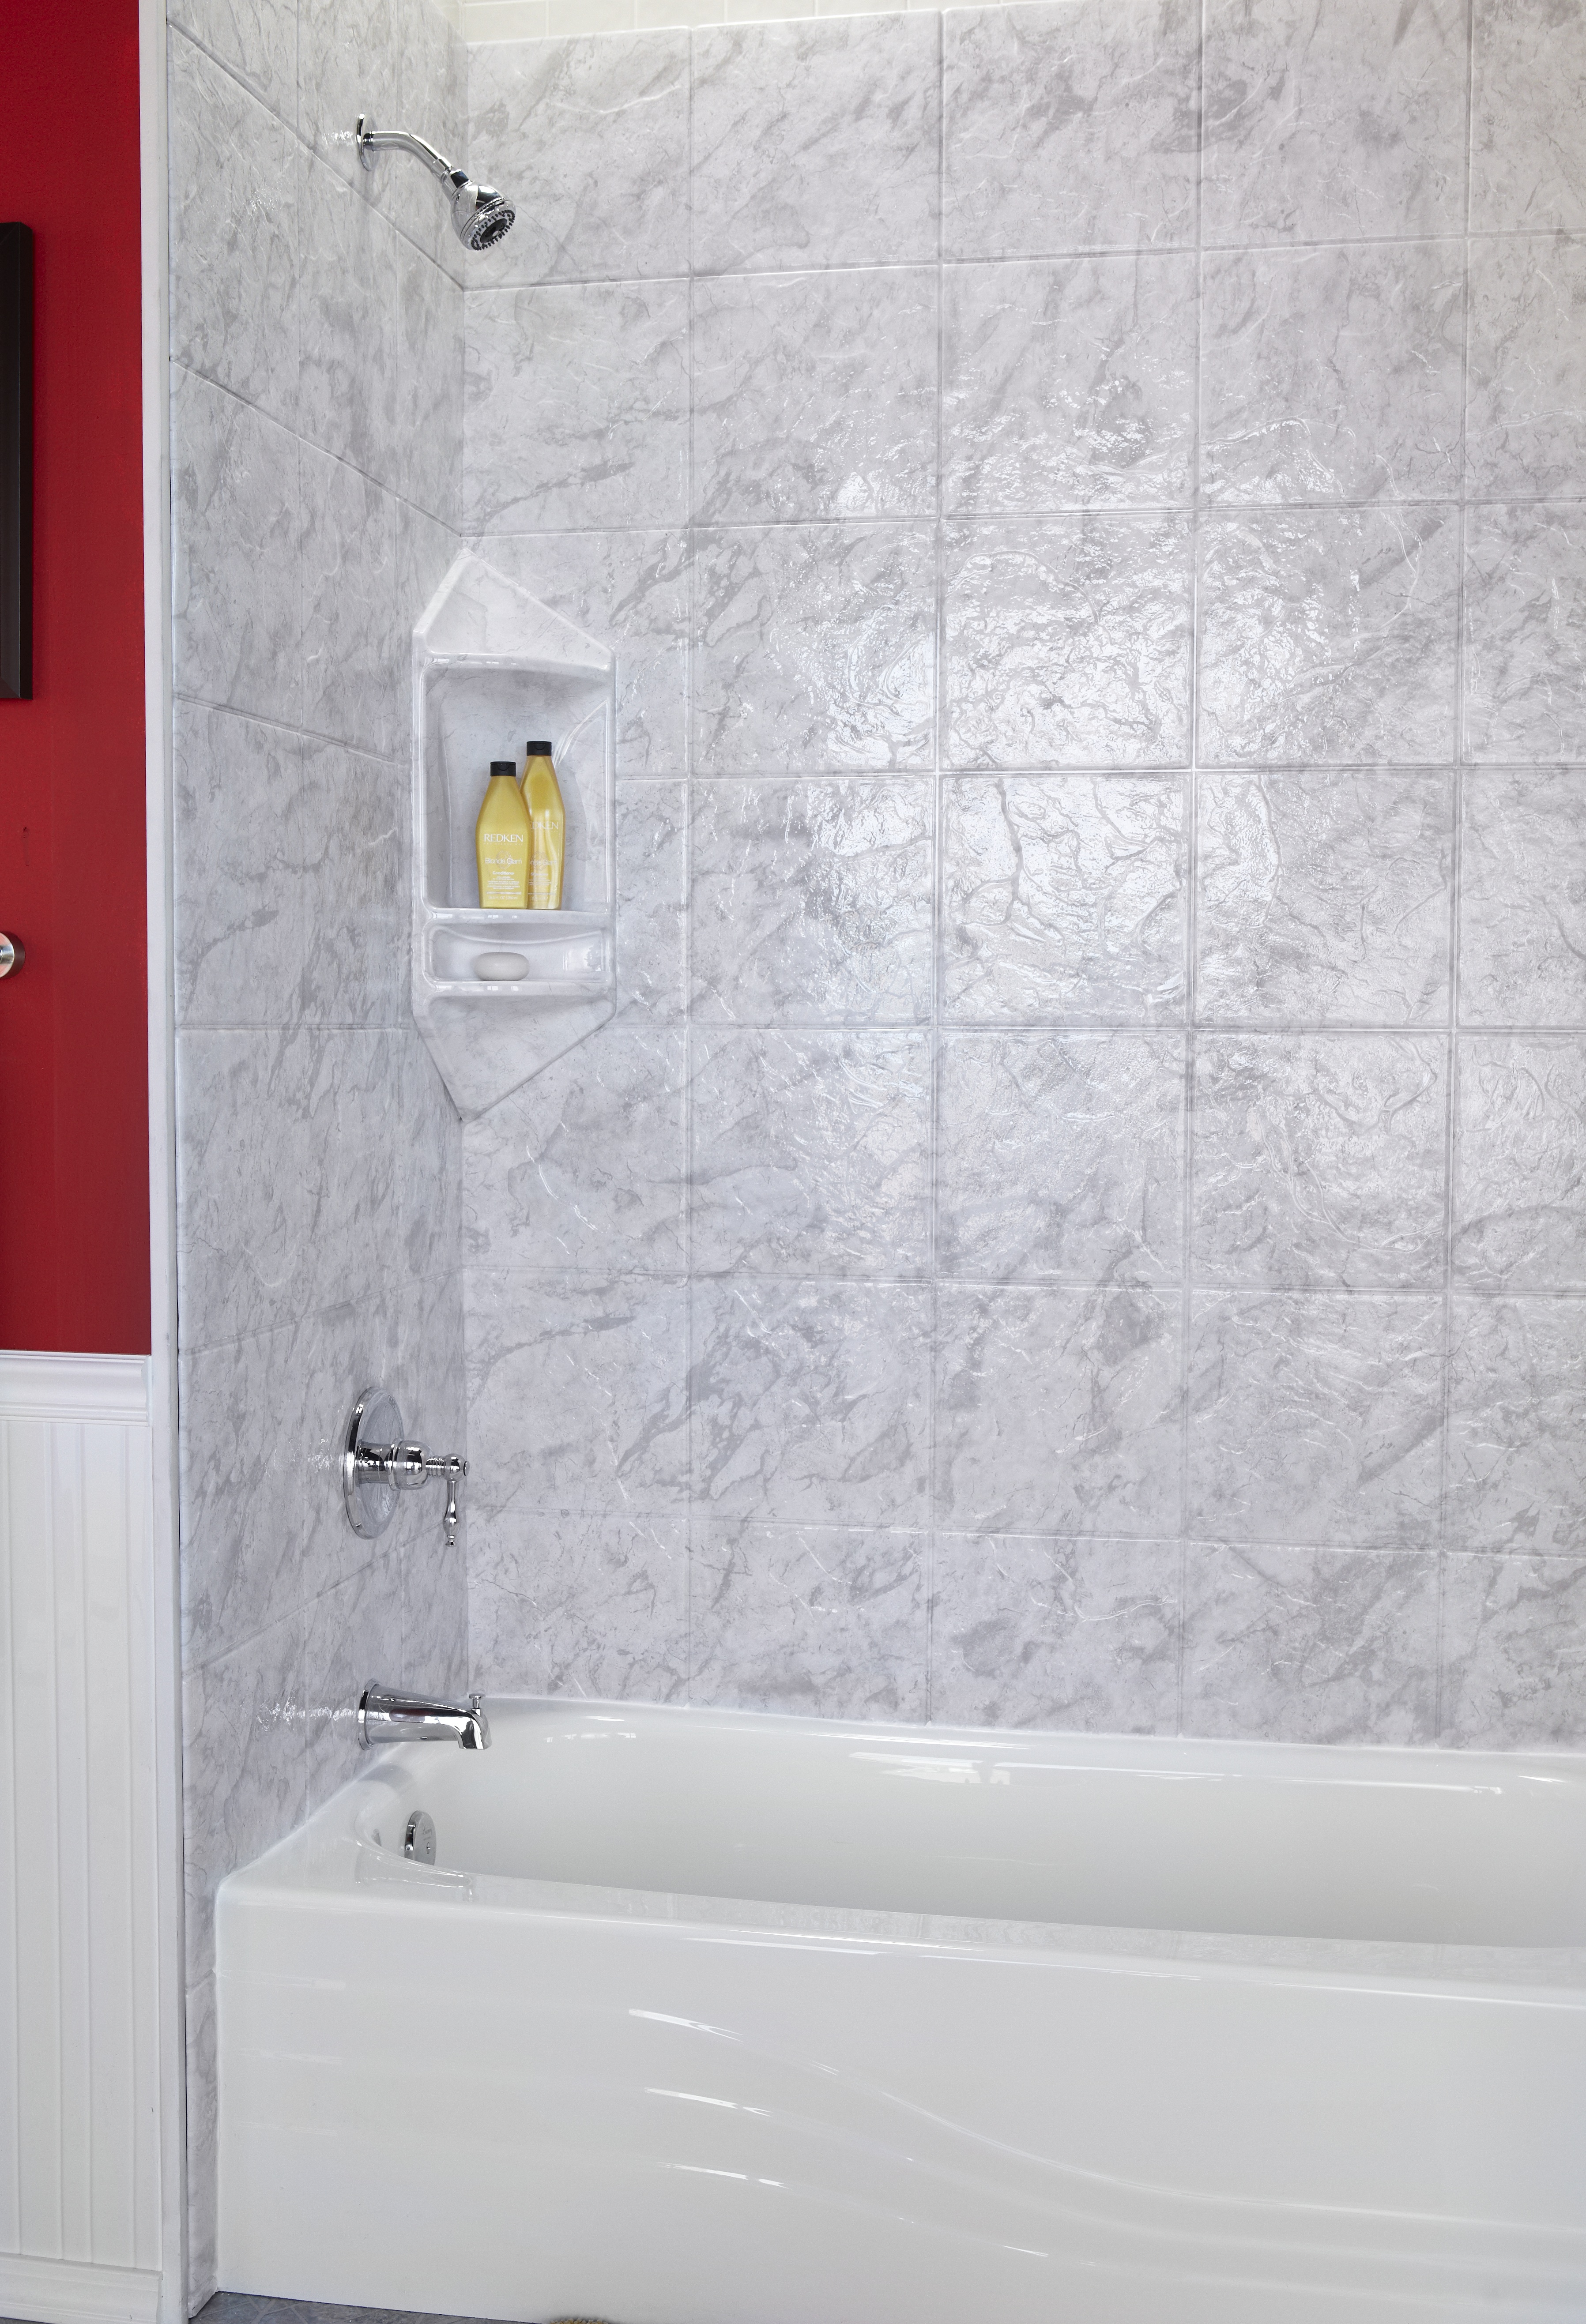 Wall Patterns, Groutless Shower Tile